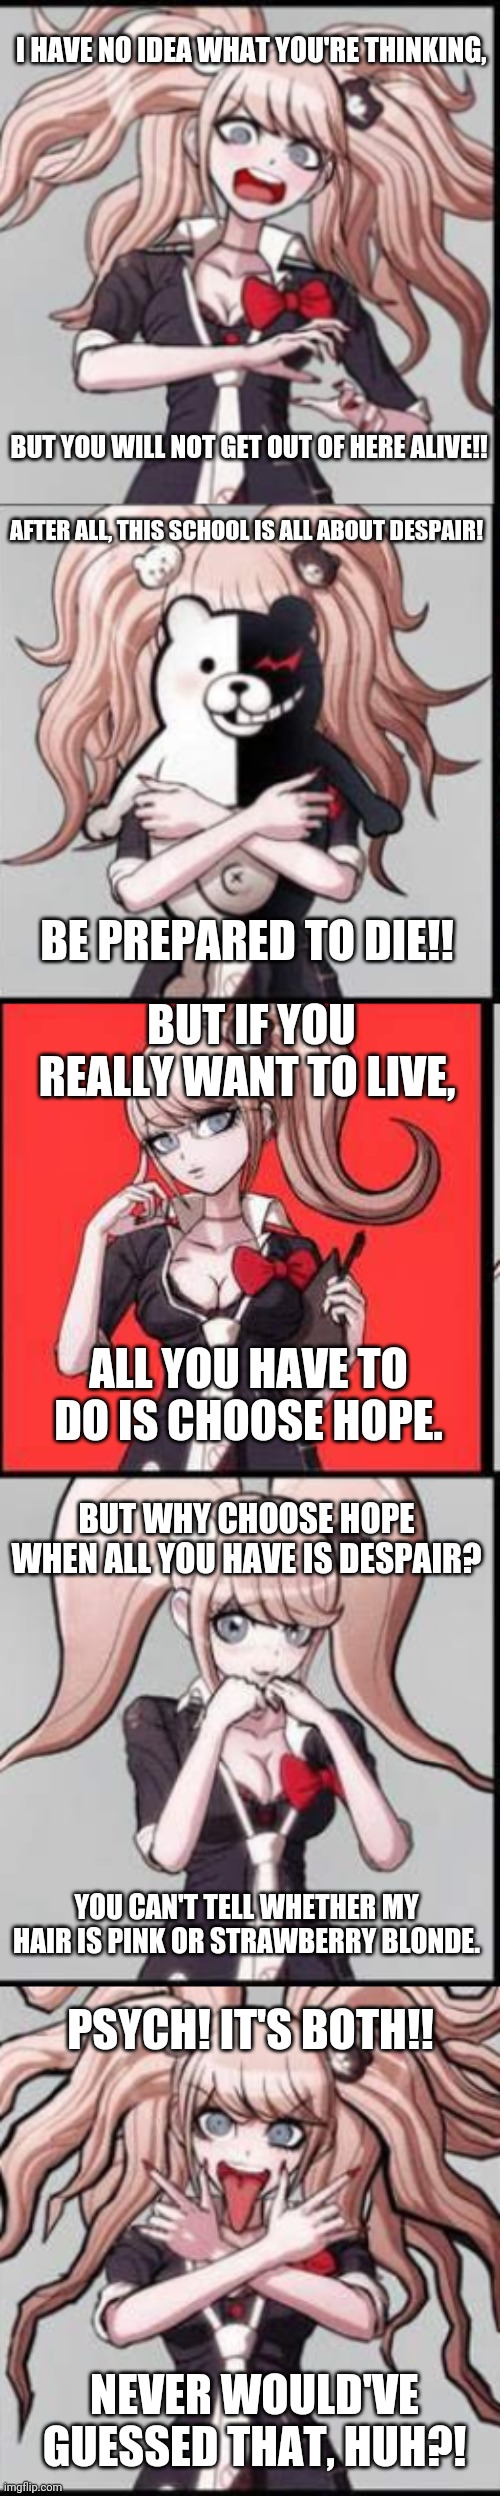 Junko's Personality At It's Finest | I HAVE NO IDEA WHAT YOU'RE THINKING, BUT YOU WILL NOT GET OUT OF HERE ALIVE!! AFTER ALL, THIS SCHOOL IS ALL ABOUT DESPAIR! BE PREPARED TO DIE!! BUT IF YOU REALLY WANT TO LIVE, ALL YOU HAVE TO DO IS CHOOSE HOPE. BUT WHY CHOOSE HOPE WHEN ALL YOU HAVE IS DESPAIR? YOU CAN'T TELL WHETHER MY HAIR IS PINK OR STRAWBERRY BLONDE. PSYCH! IT'S BOTH!! NEVER WOULD'VE GUESSED THAT, HUH?! | image tagged in junko,danganronpa,anime,memes,personality | made w/ Imgflip meme maker